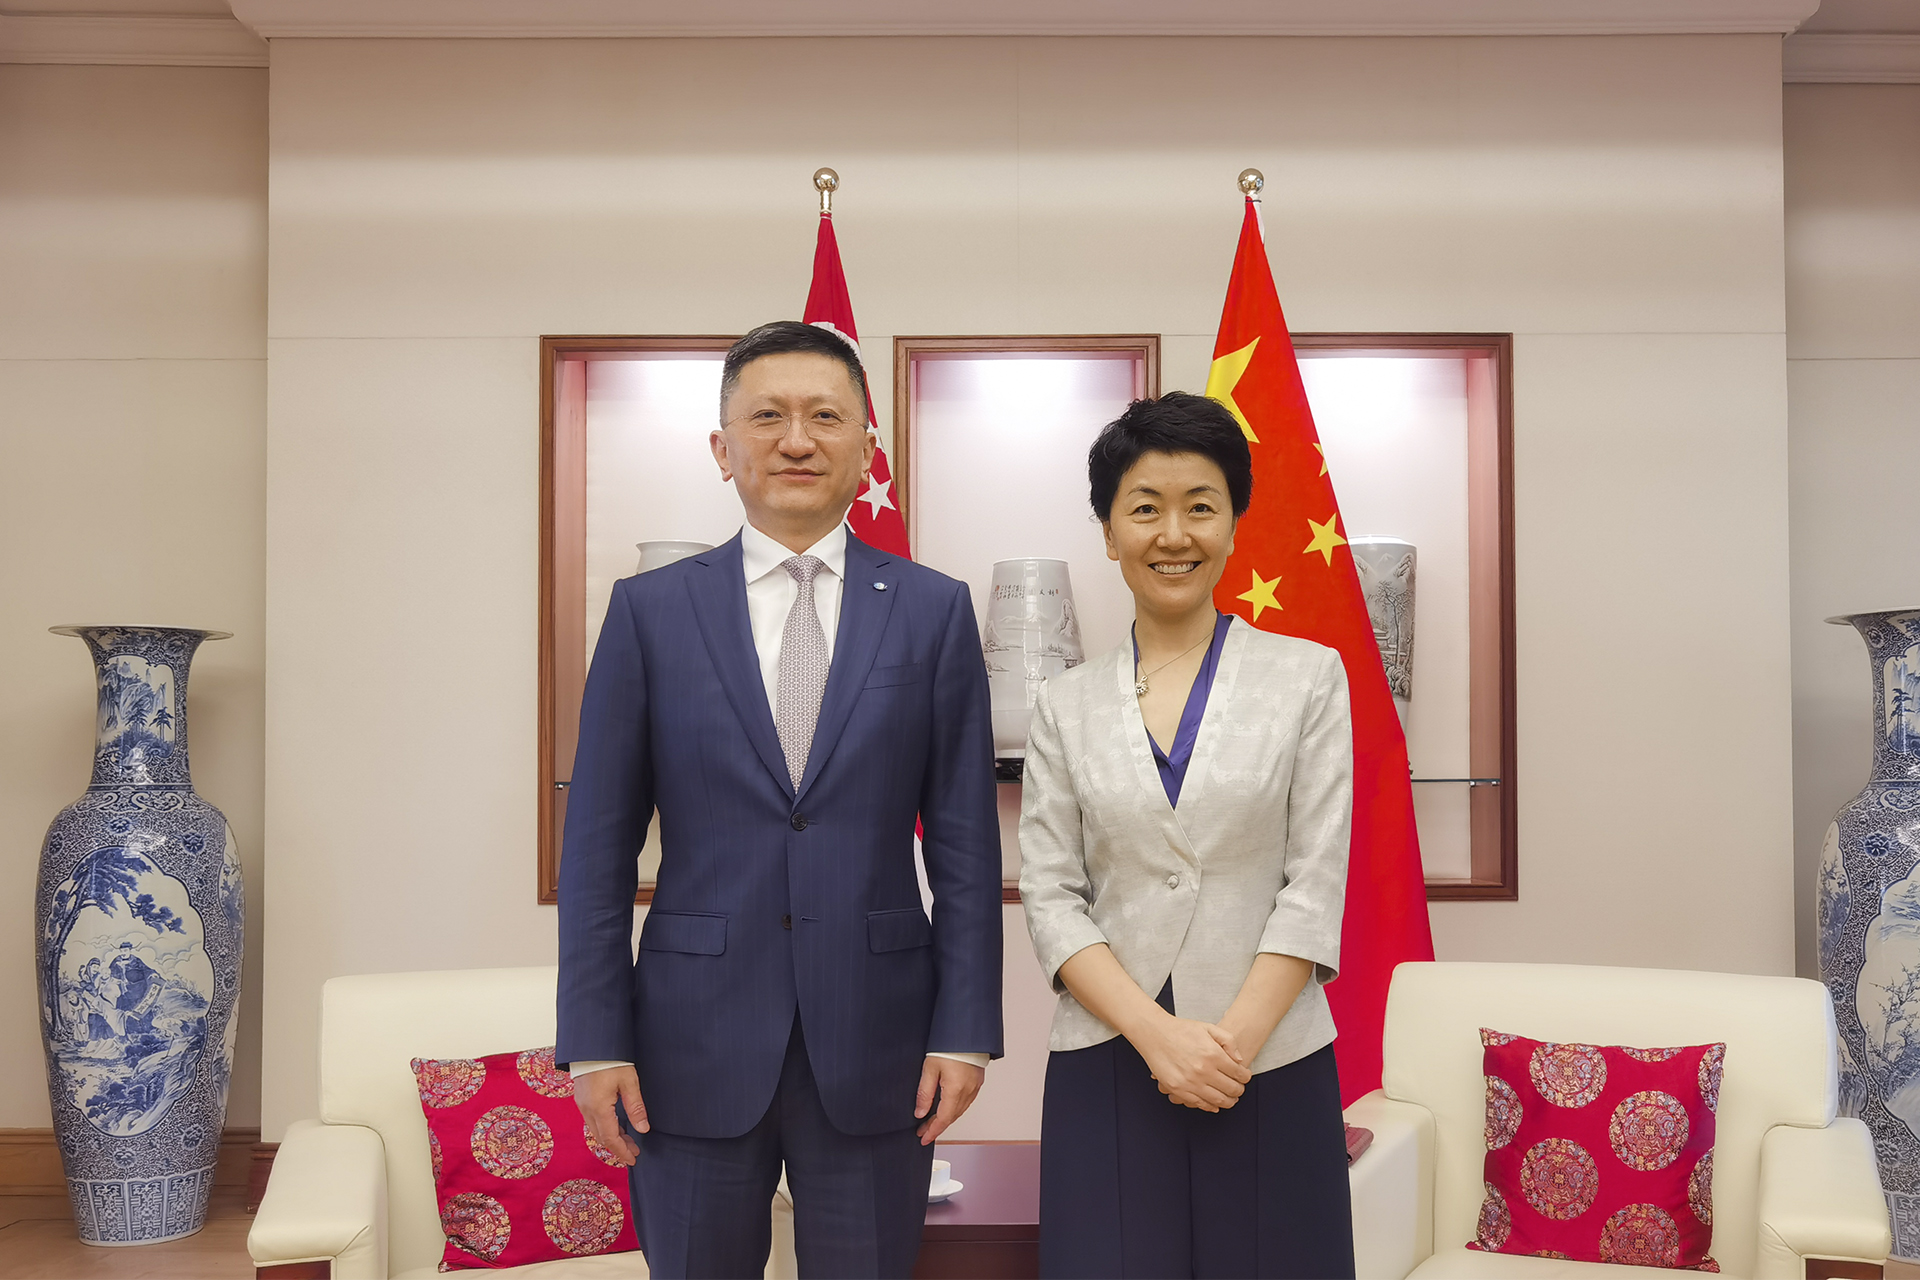 Guotai Junan Futures Singapore Co., Ltd. started its business operation and signed strategic cooperation with Bank of China Singapore Branch and Shengbao Bank ...987 / author:Guotai Jun'an / source:Guotai Jun'an